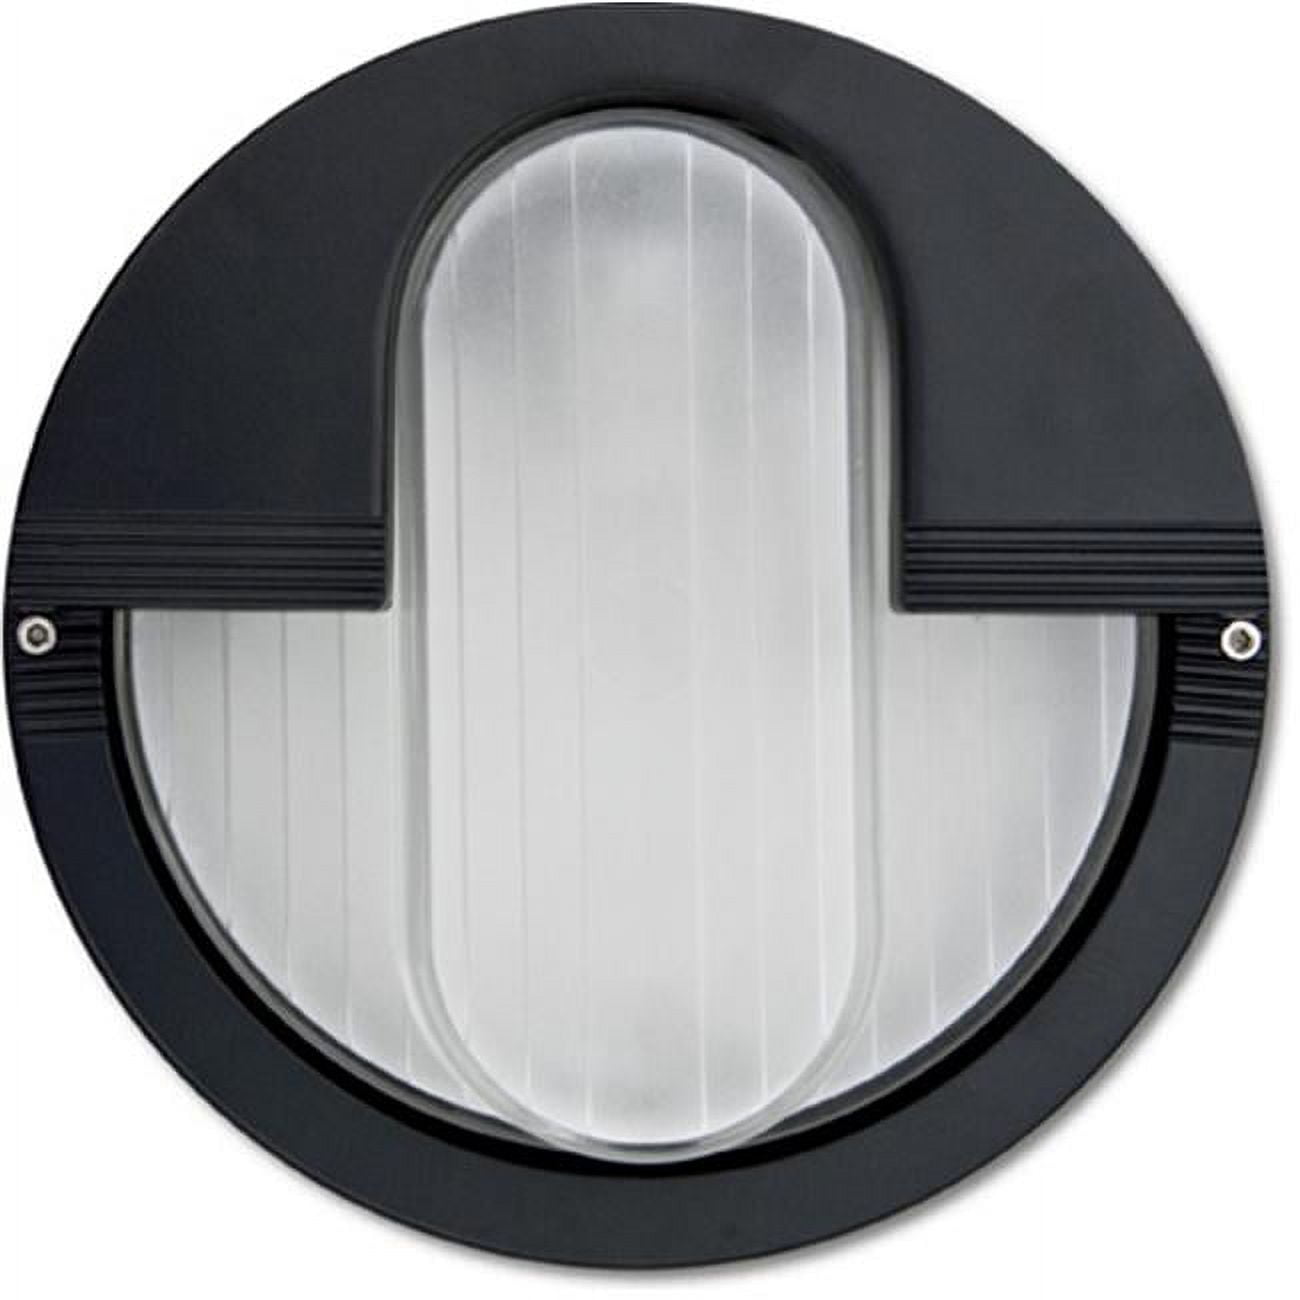 Picture of Dabmar Lighting W3000-B 10.13 x 10.13 x 3.31 in. 120 V 60 watts Incandenscent Type Powder Coated Cast Aluminum Surface Mounted Wall Fixture Light, Black